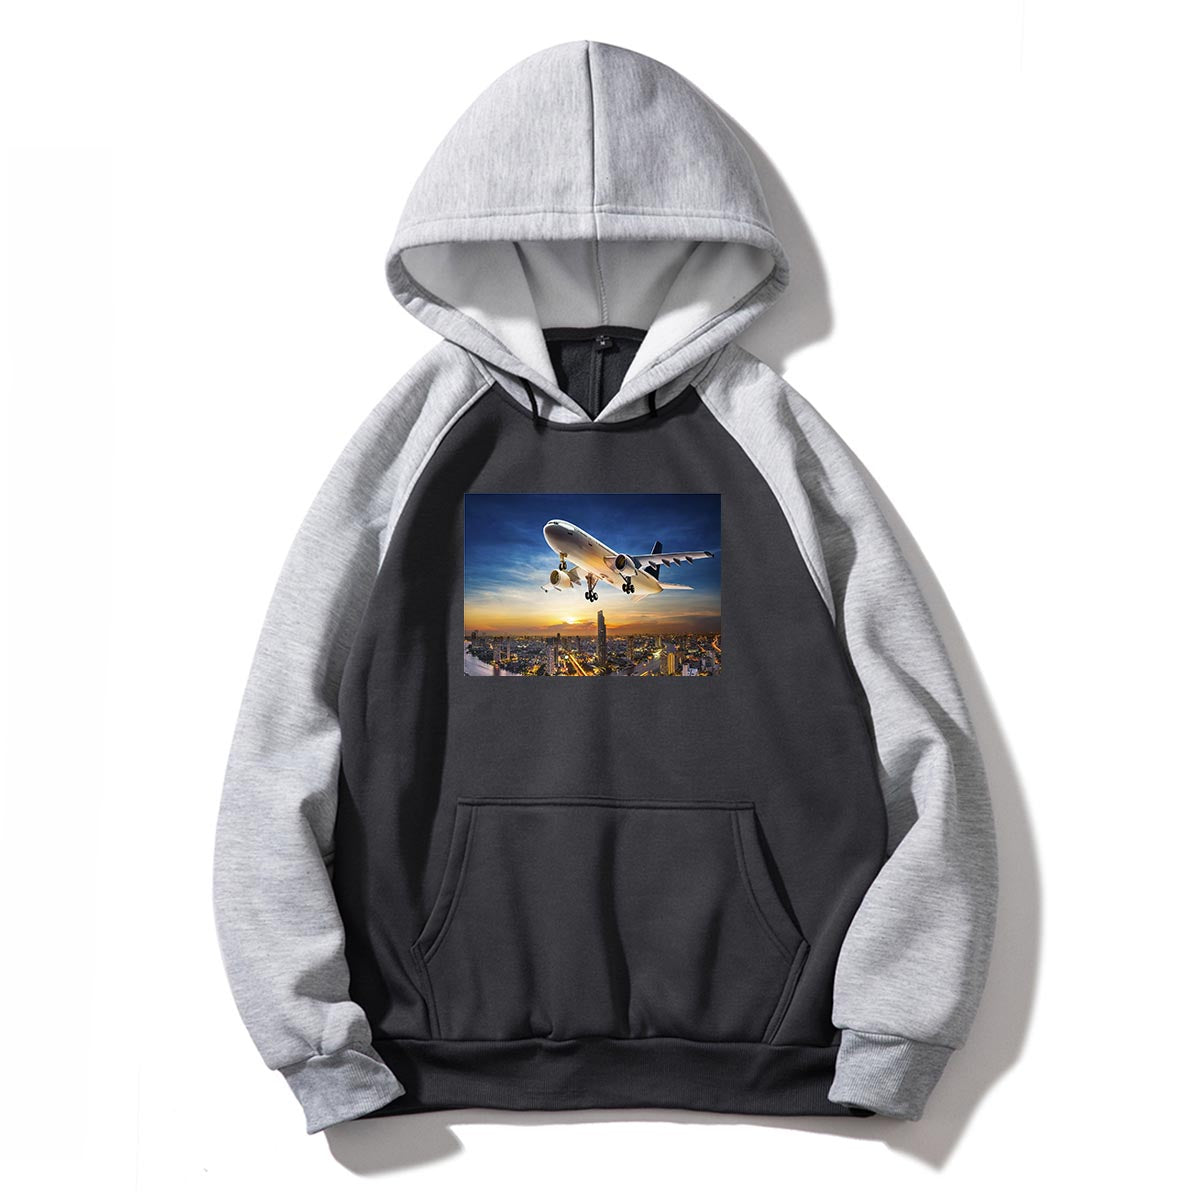 Super Aircraft over City at Sunset Designed Colourful Hoodies